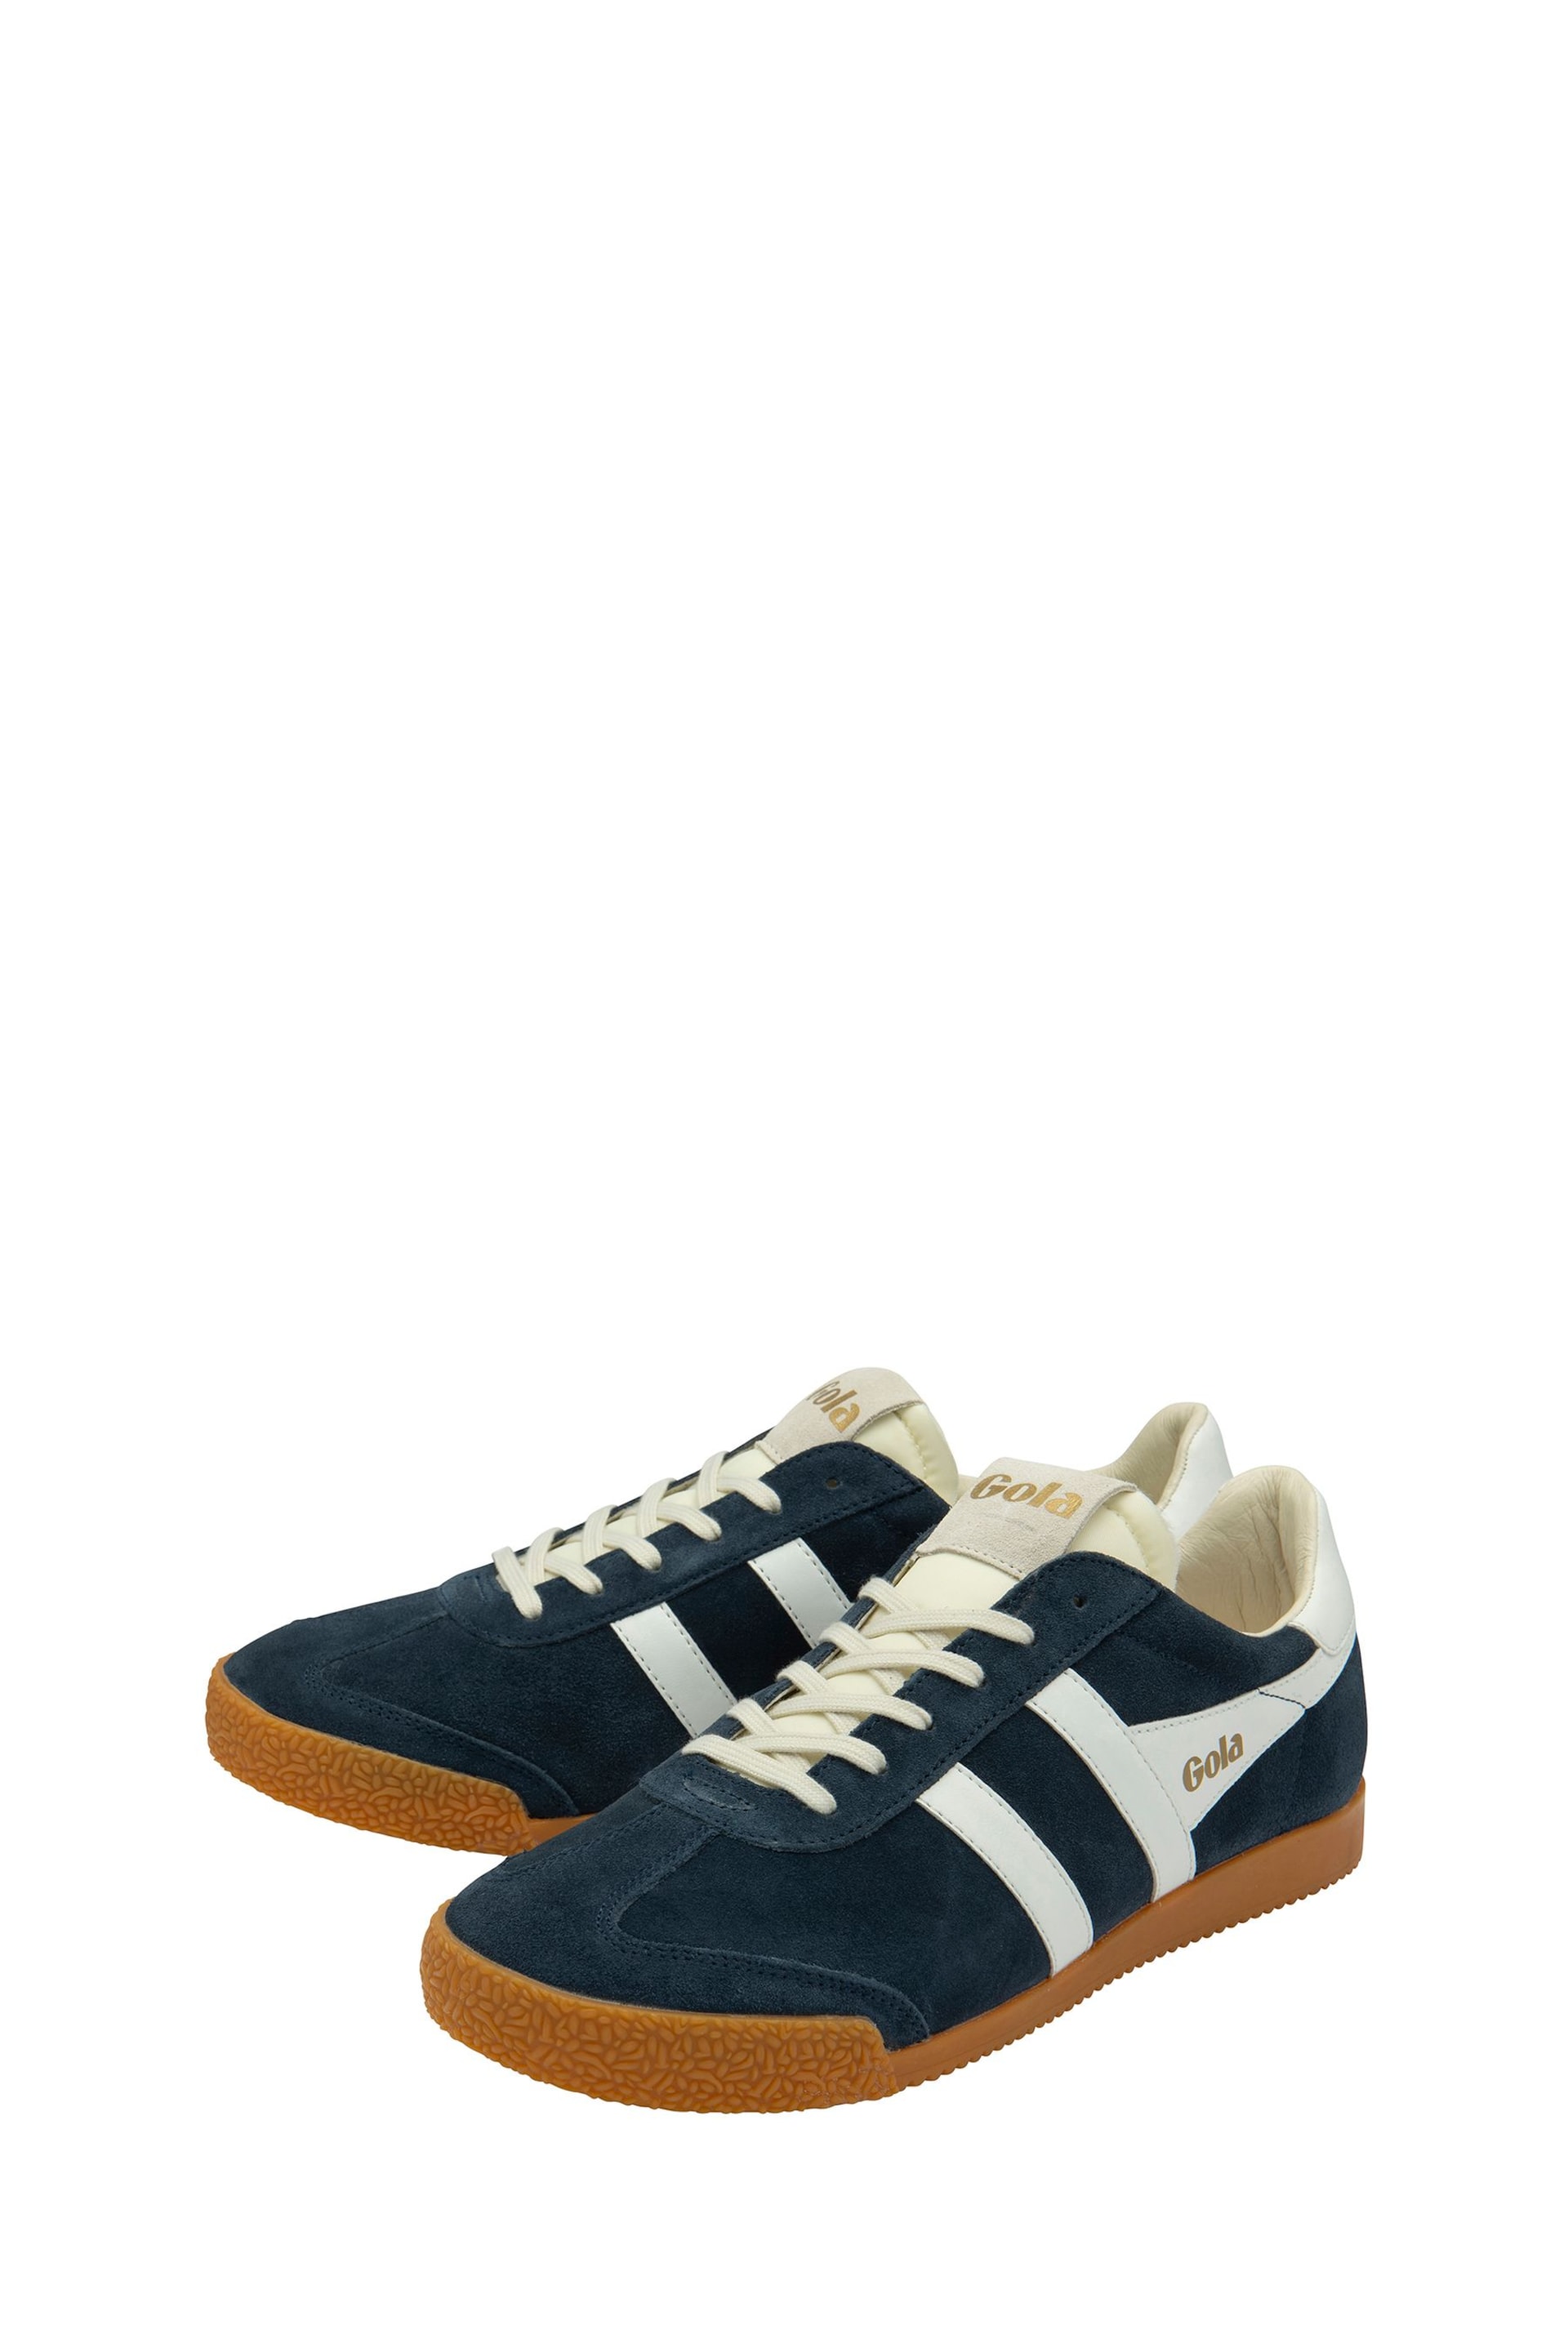 Gola Blue Mens Elan Suede Lace-Up Trainers - Image 2 of 4